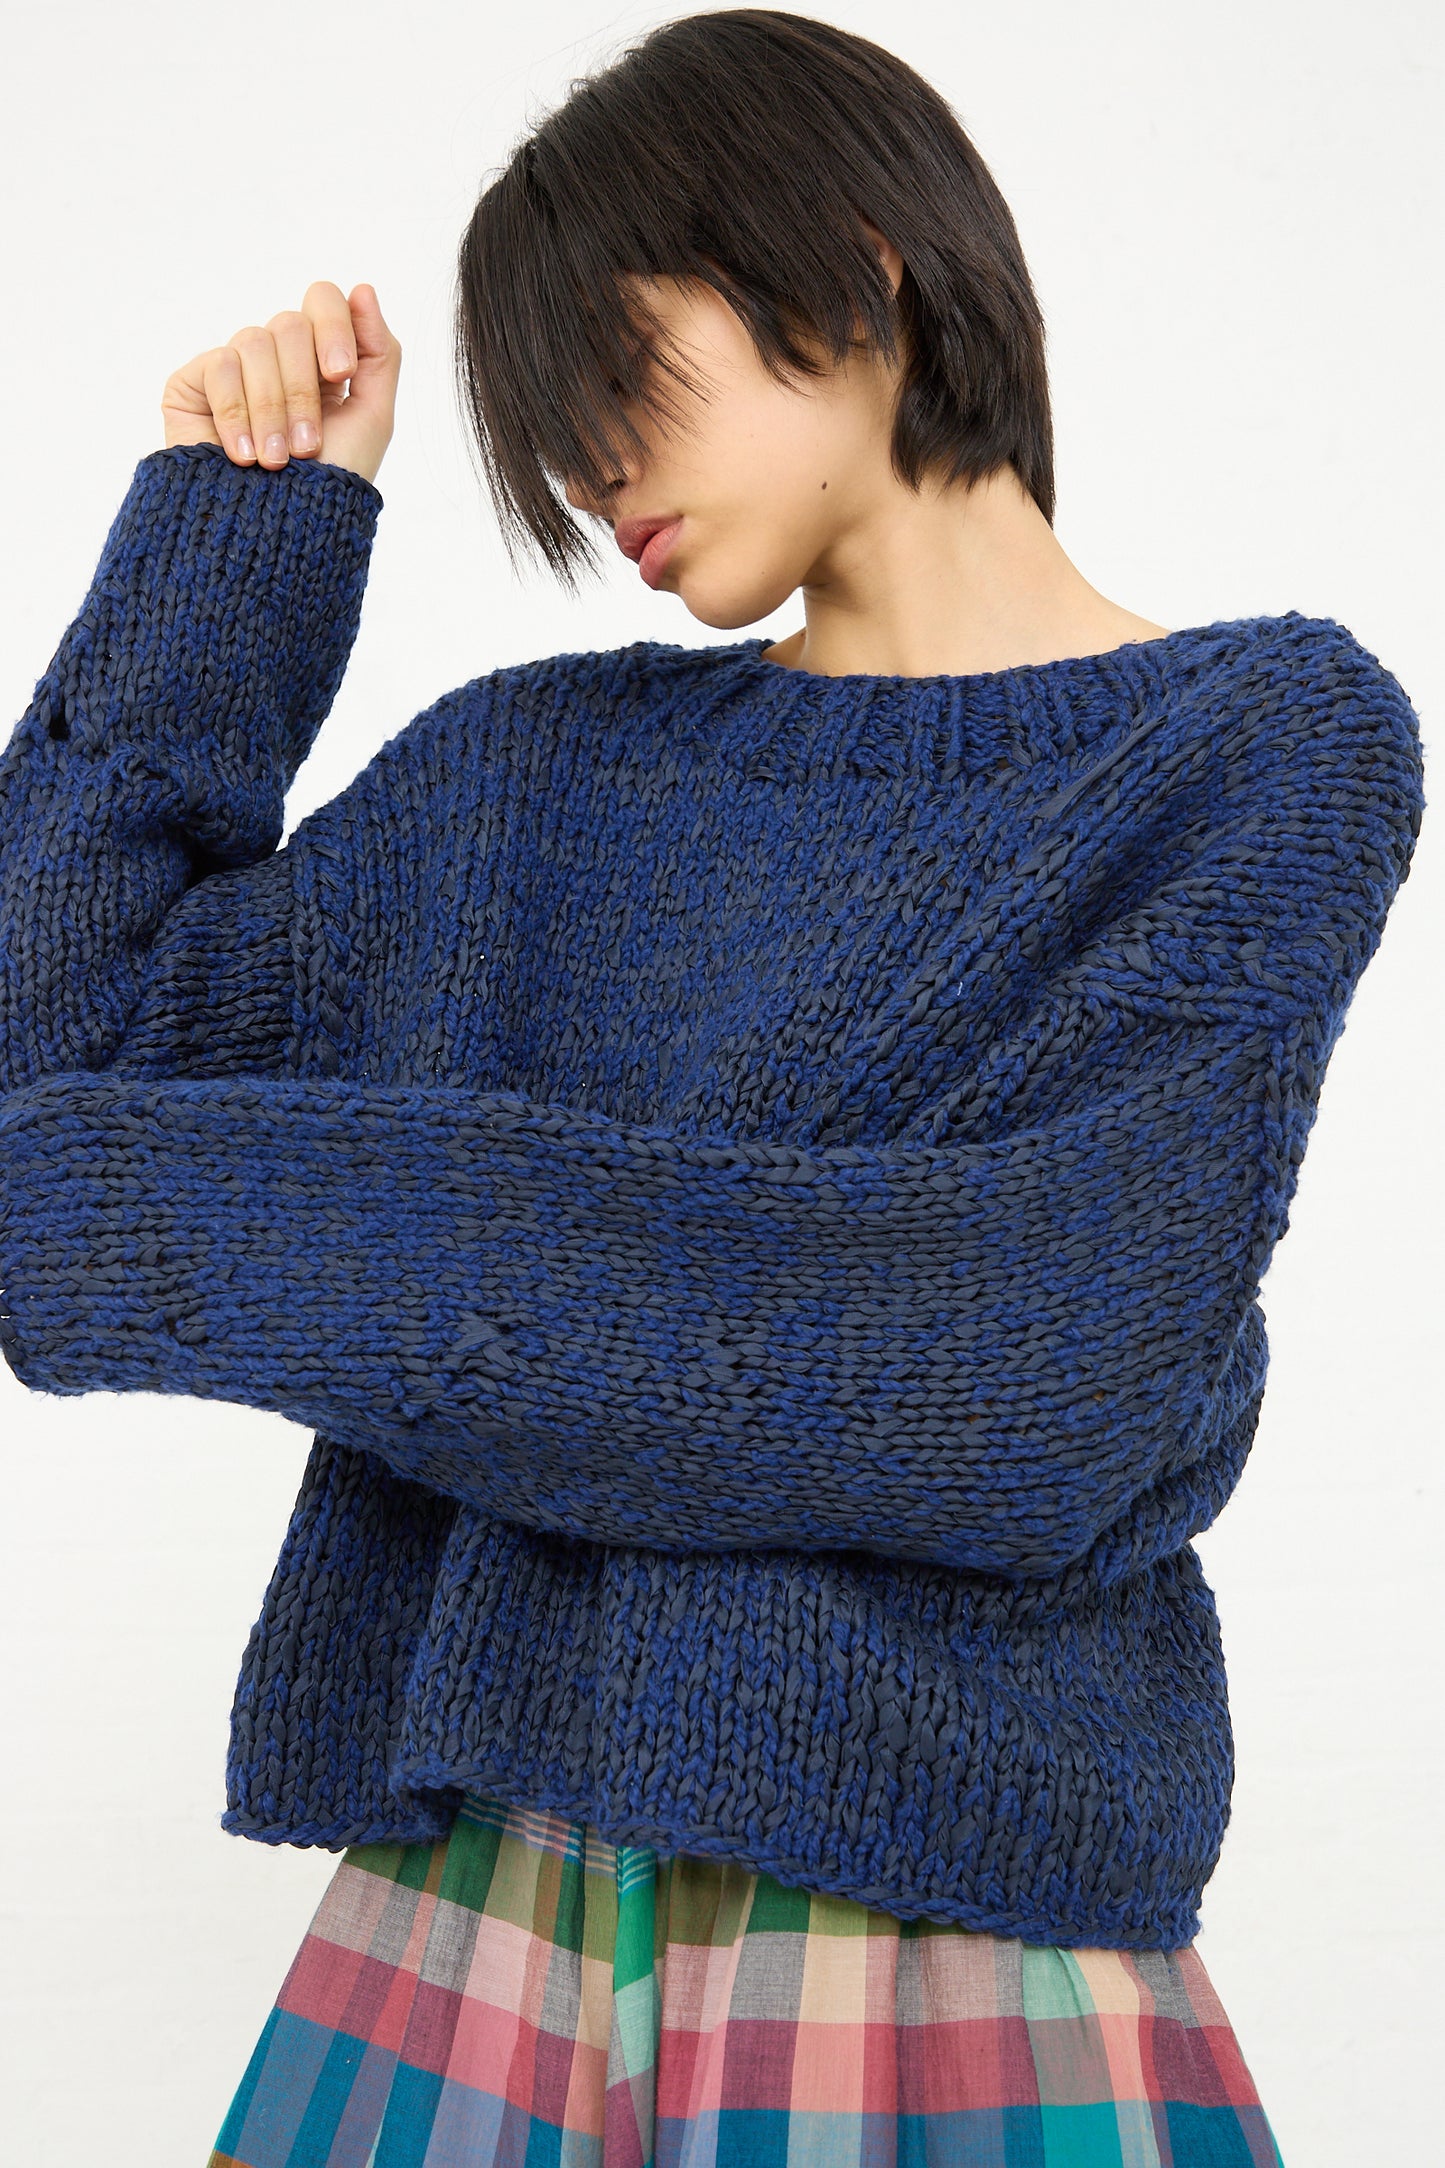 Woman in a blue, oversized Boucle Cotton Yarn Hampton sweater by Caron Callahan with her arm raised, looking downward.